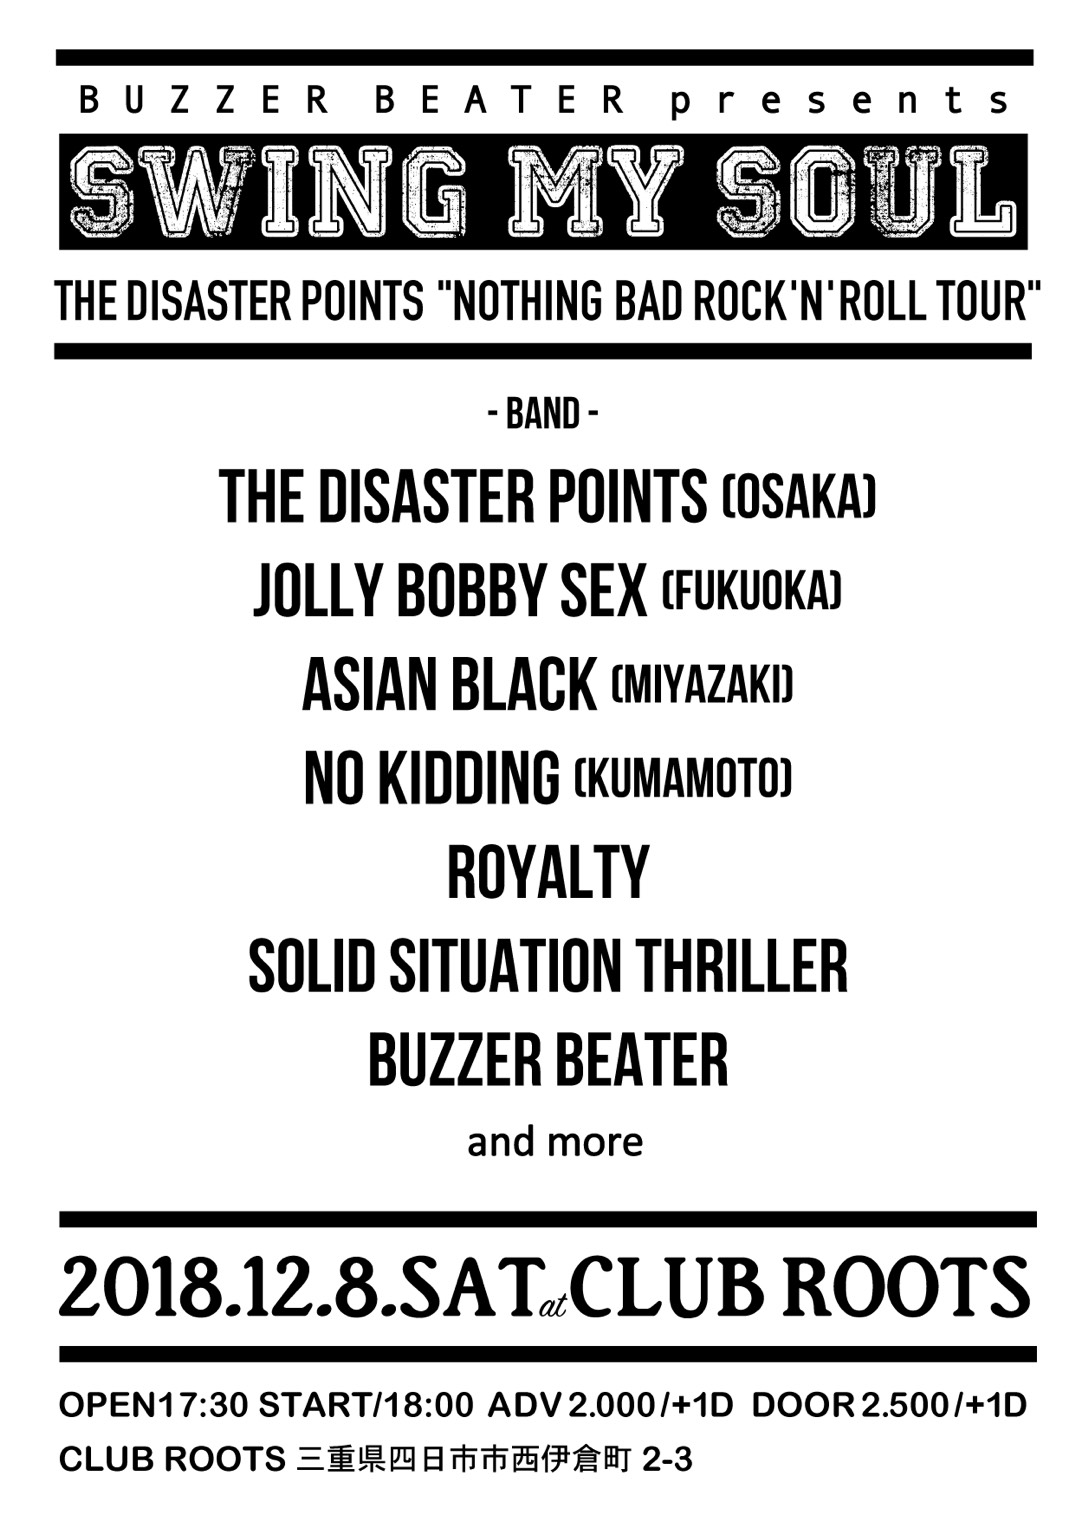 Club Roots